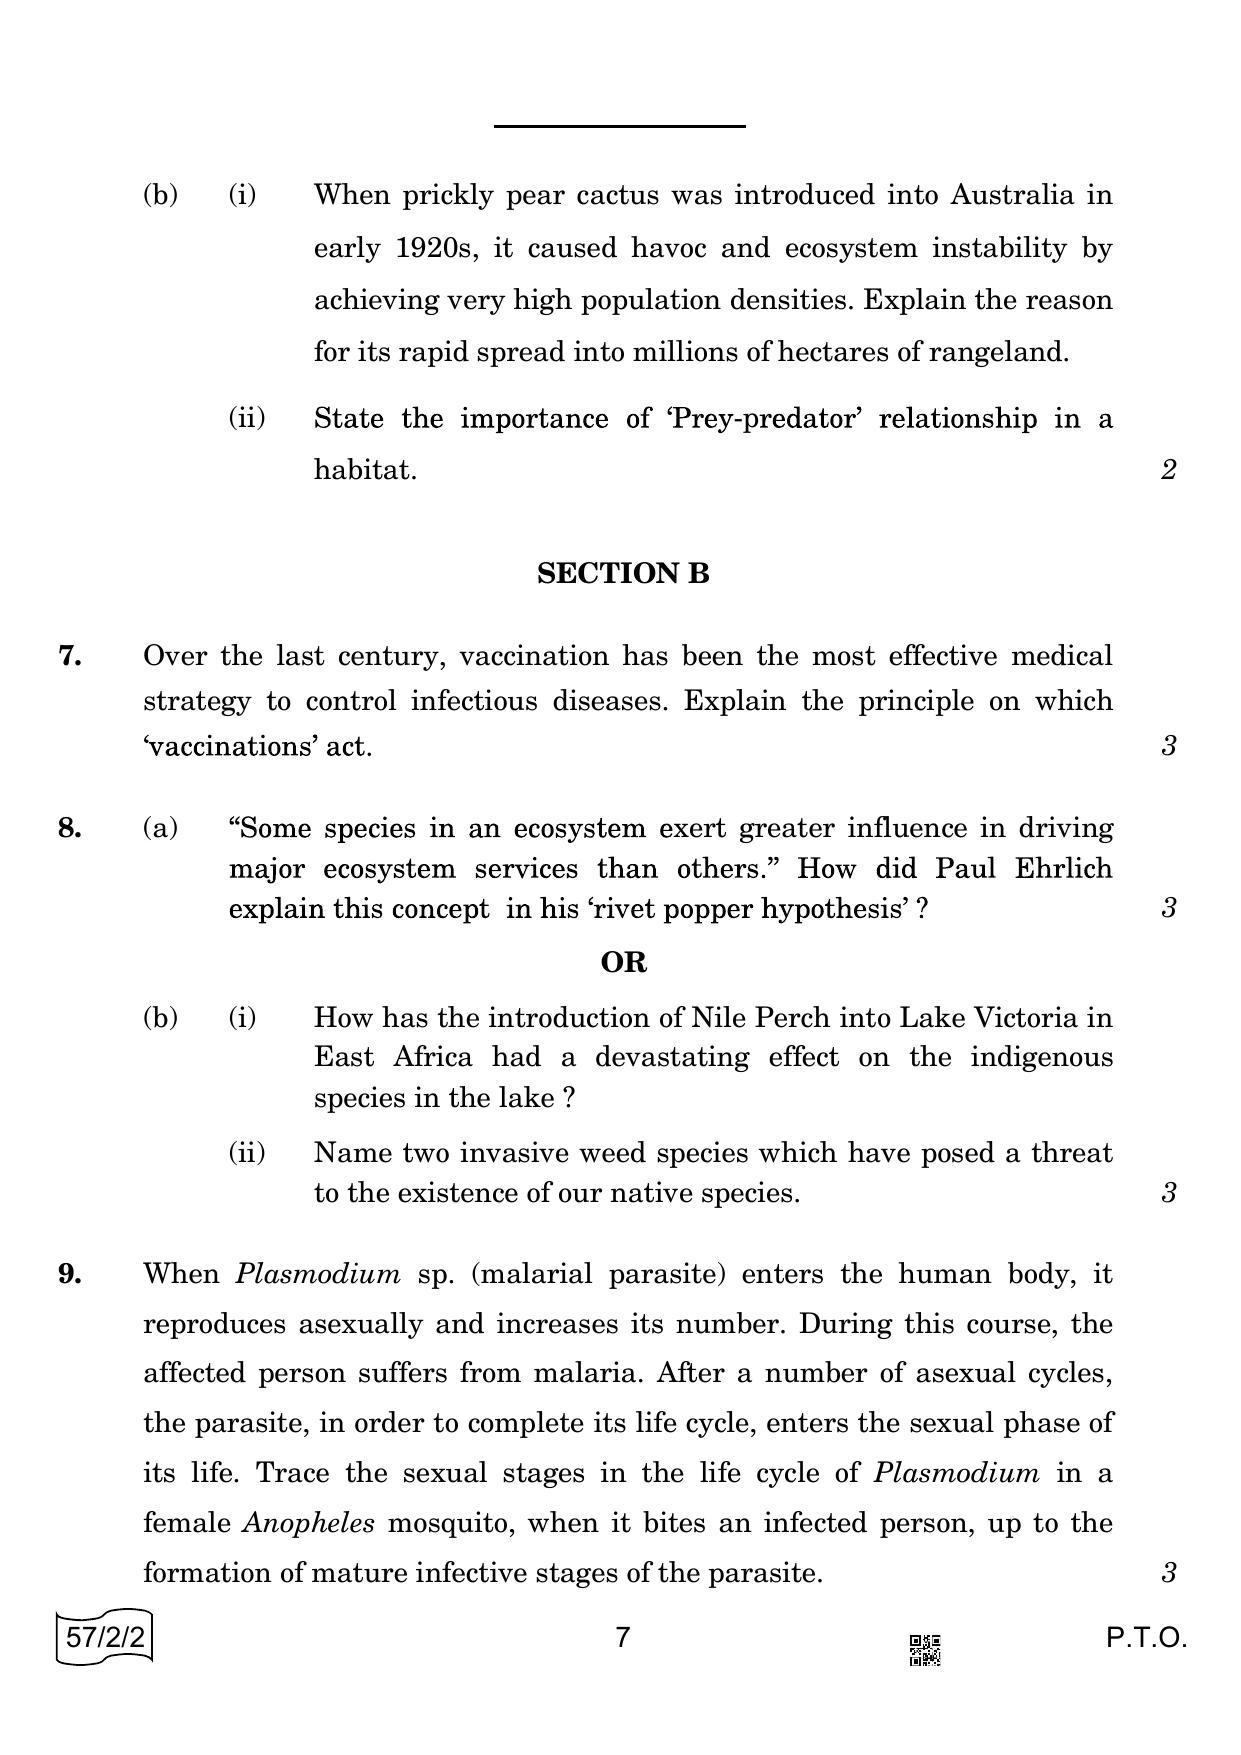 CBSE Class 12 57-2-2 Biology 2022 Question Paper - Page 7